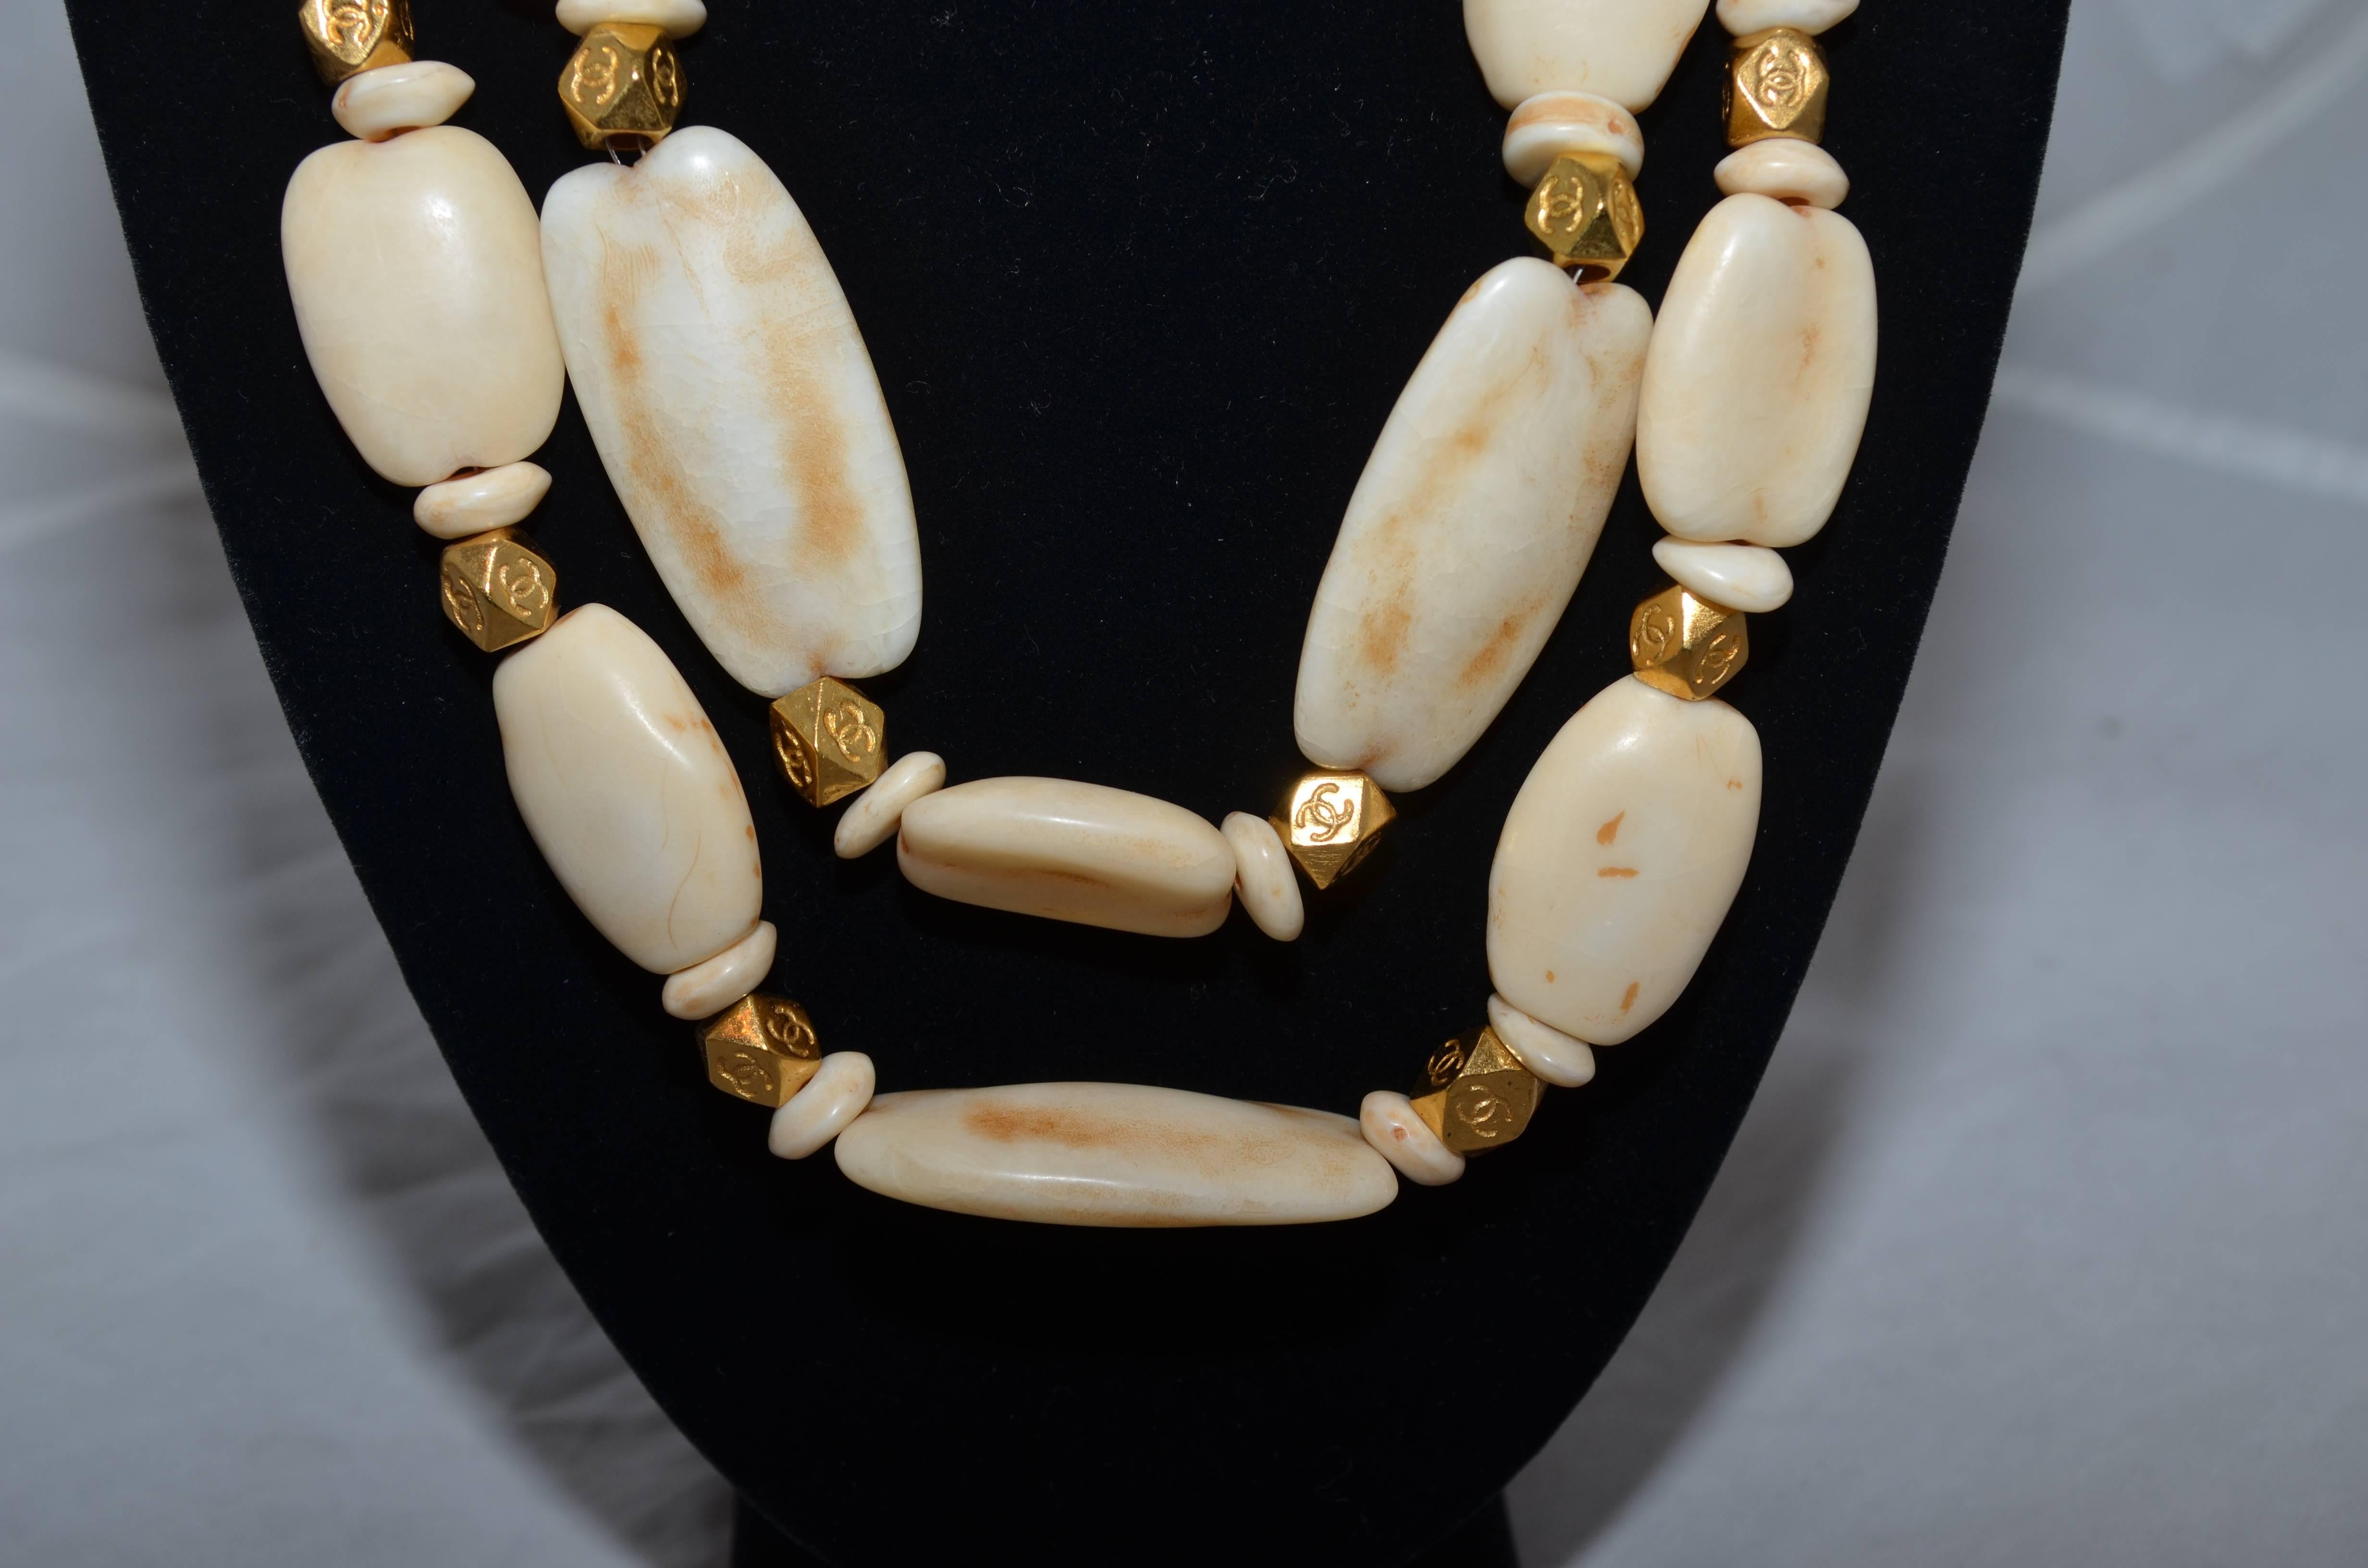 Chanel necklace from 1996 Spring collection with a double strand of chunky faux ivory beads and CC engraved gold-tone spacers. Necklace has a chain-link and hook closure for sizing. Made in France.

Length - 20''